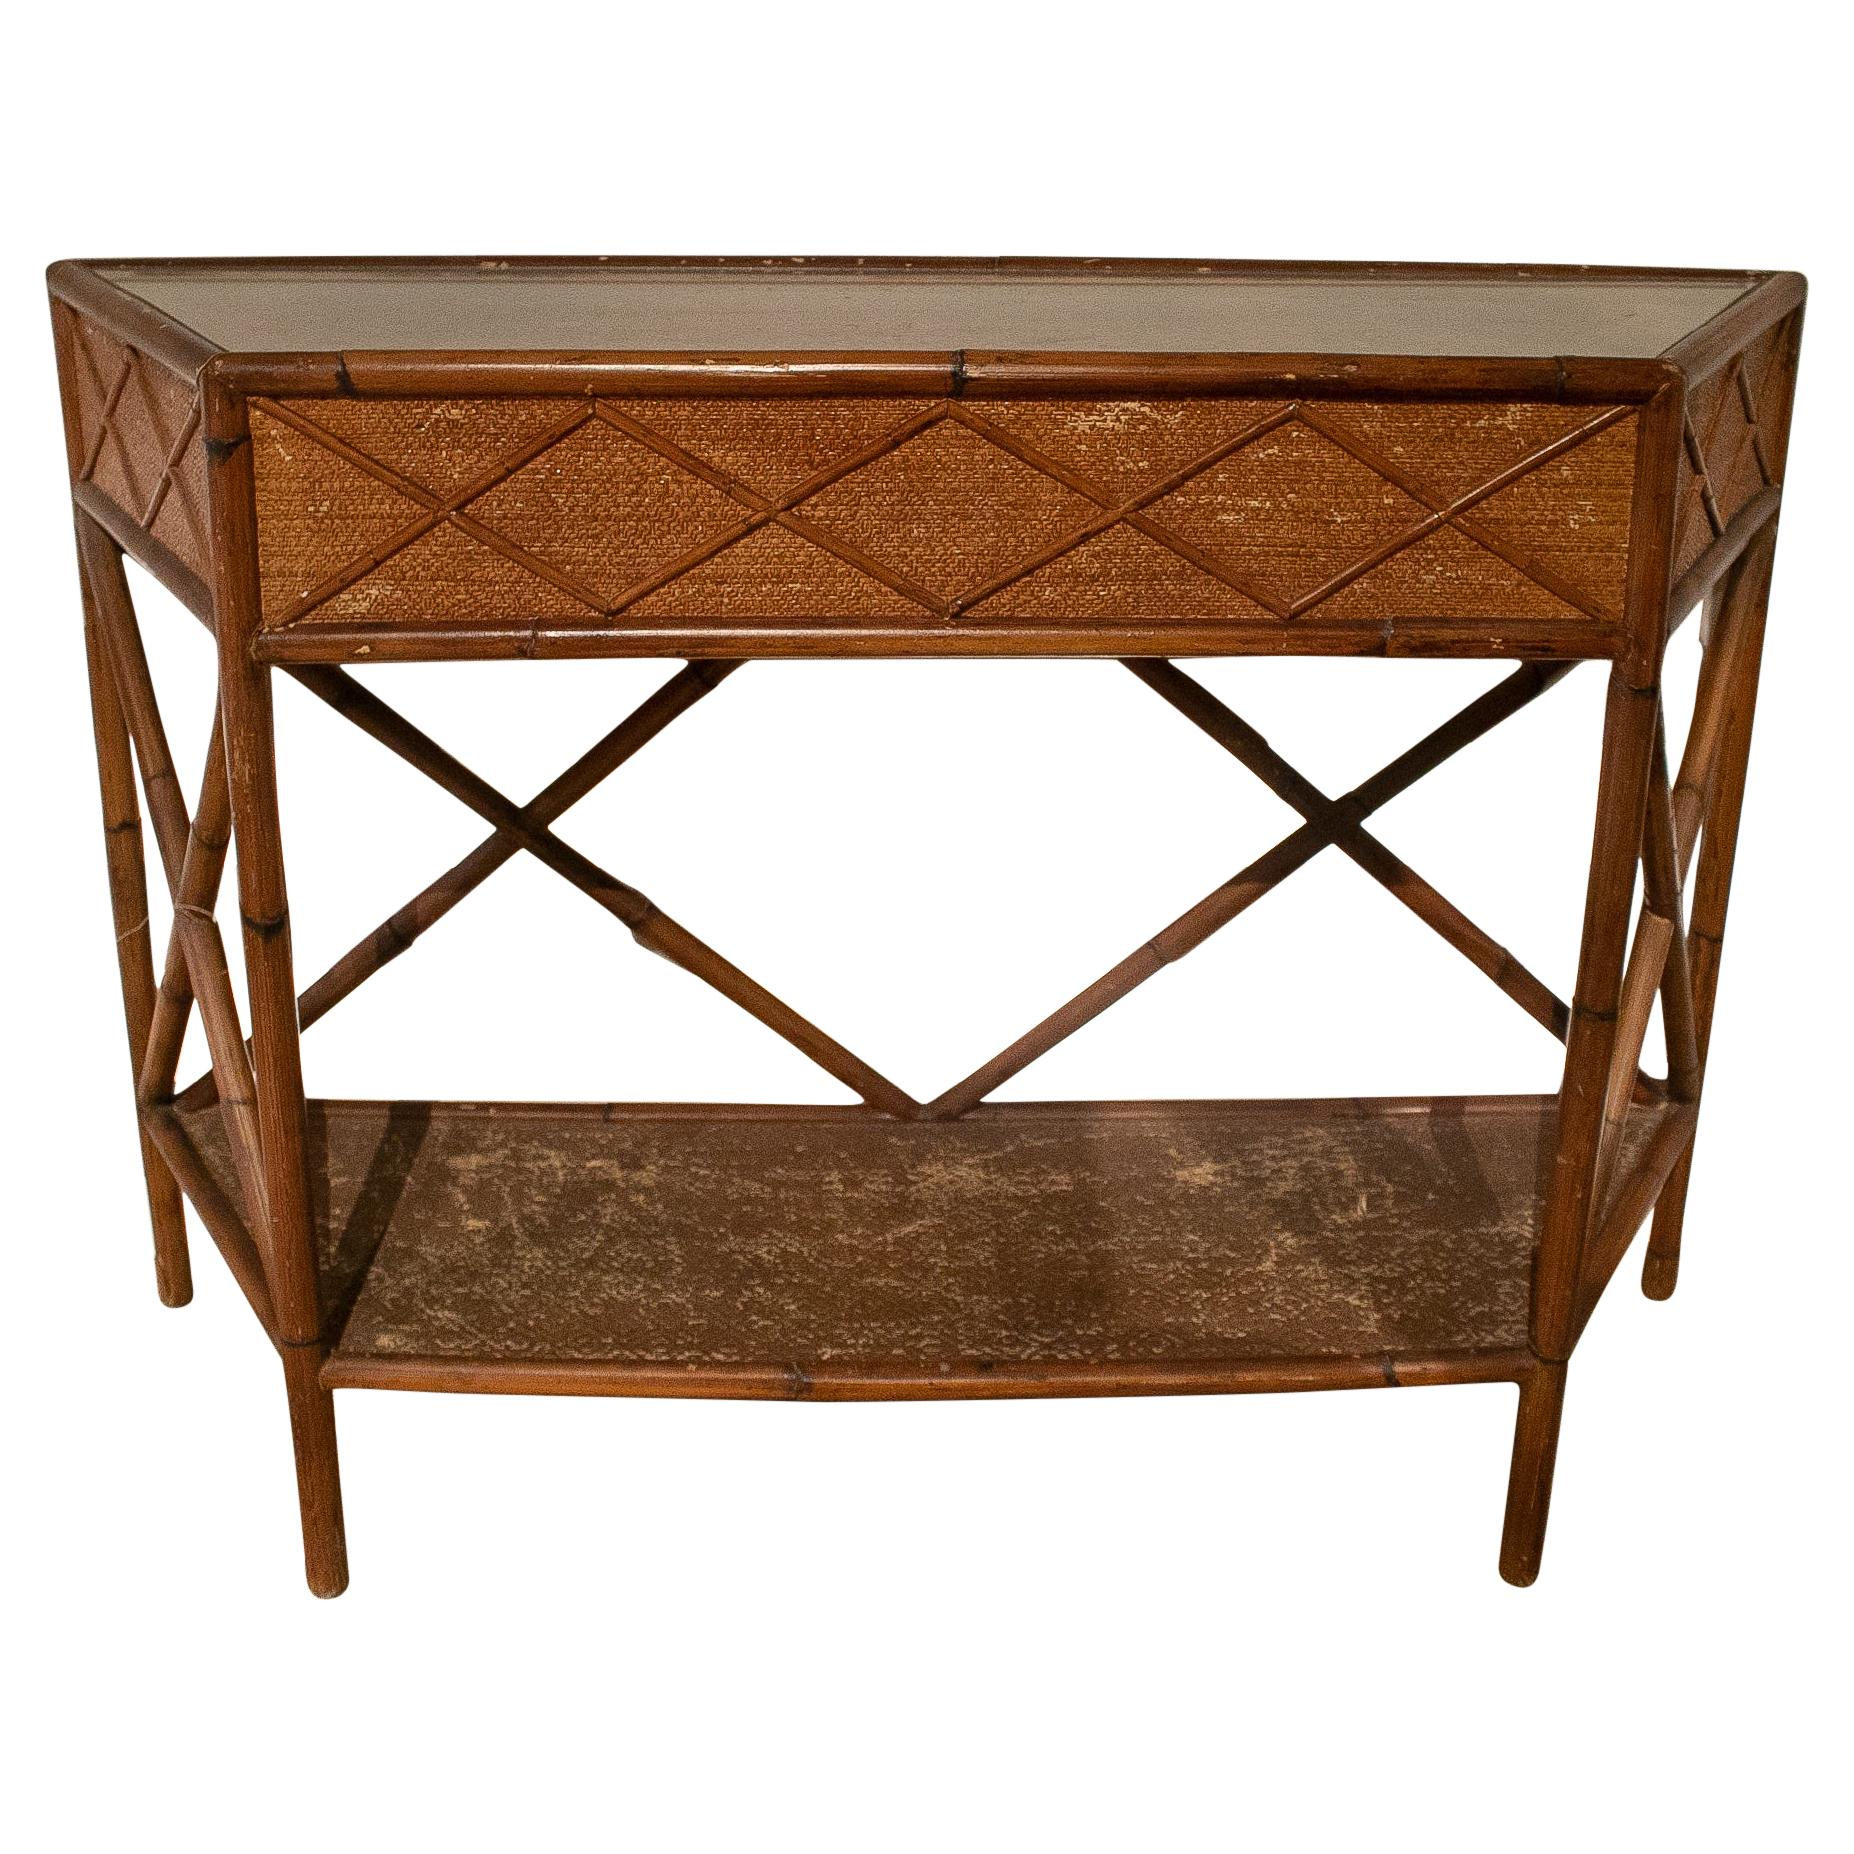 1950s English Bamboo and Lace Wicker Console Table